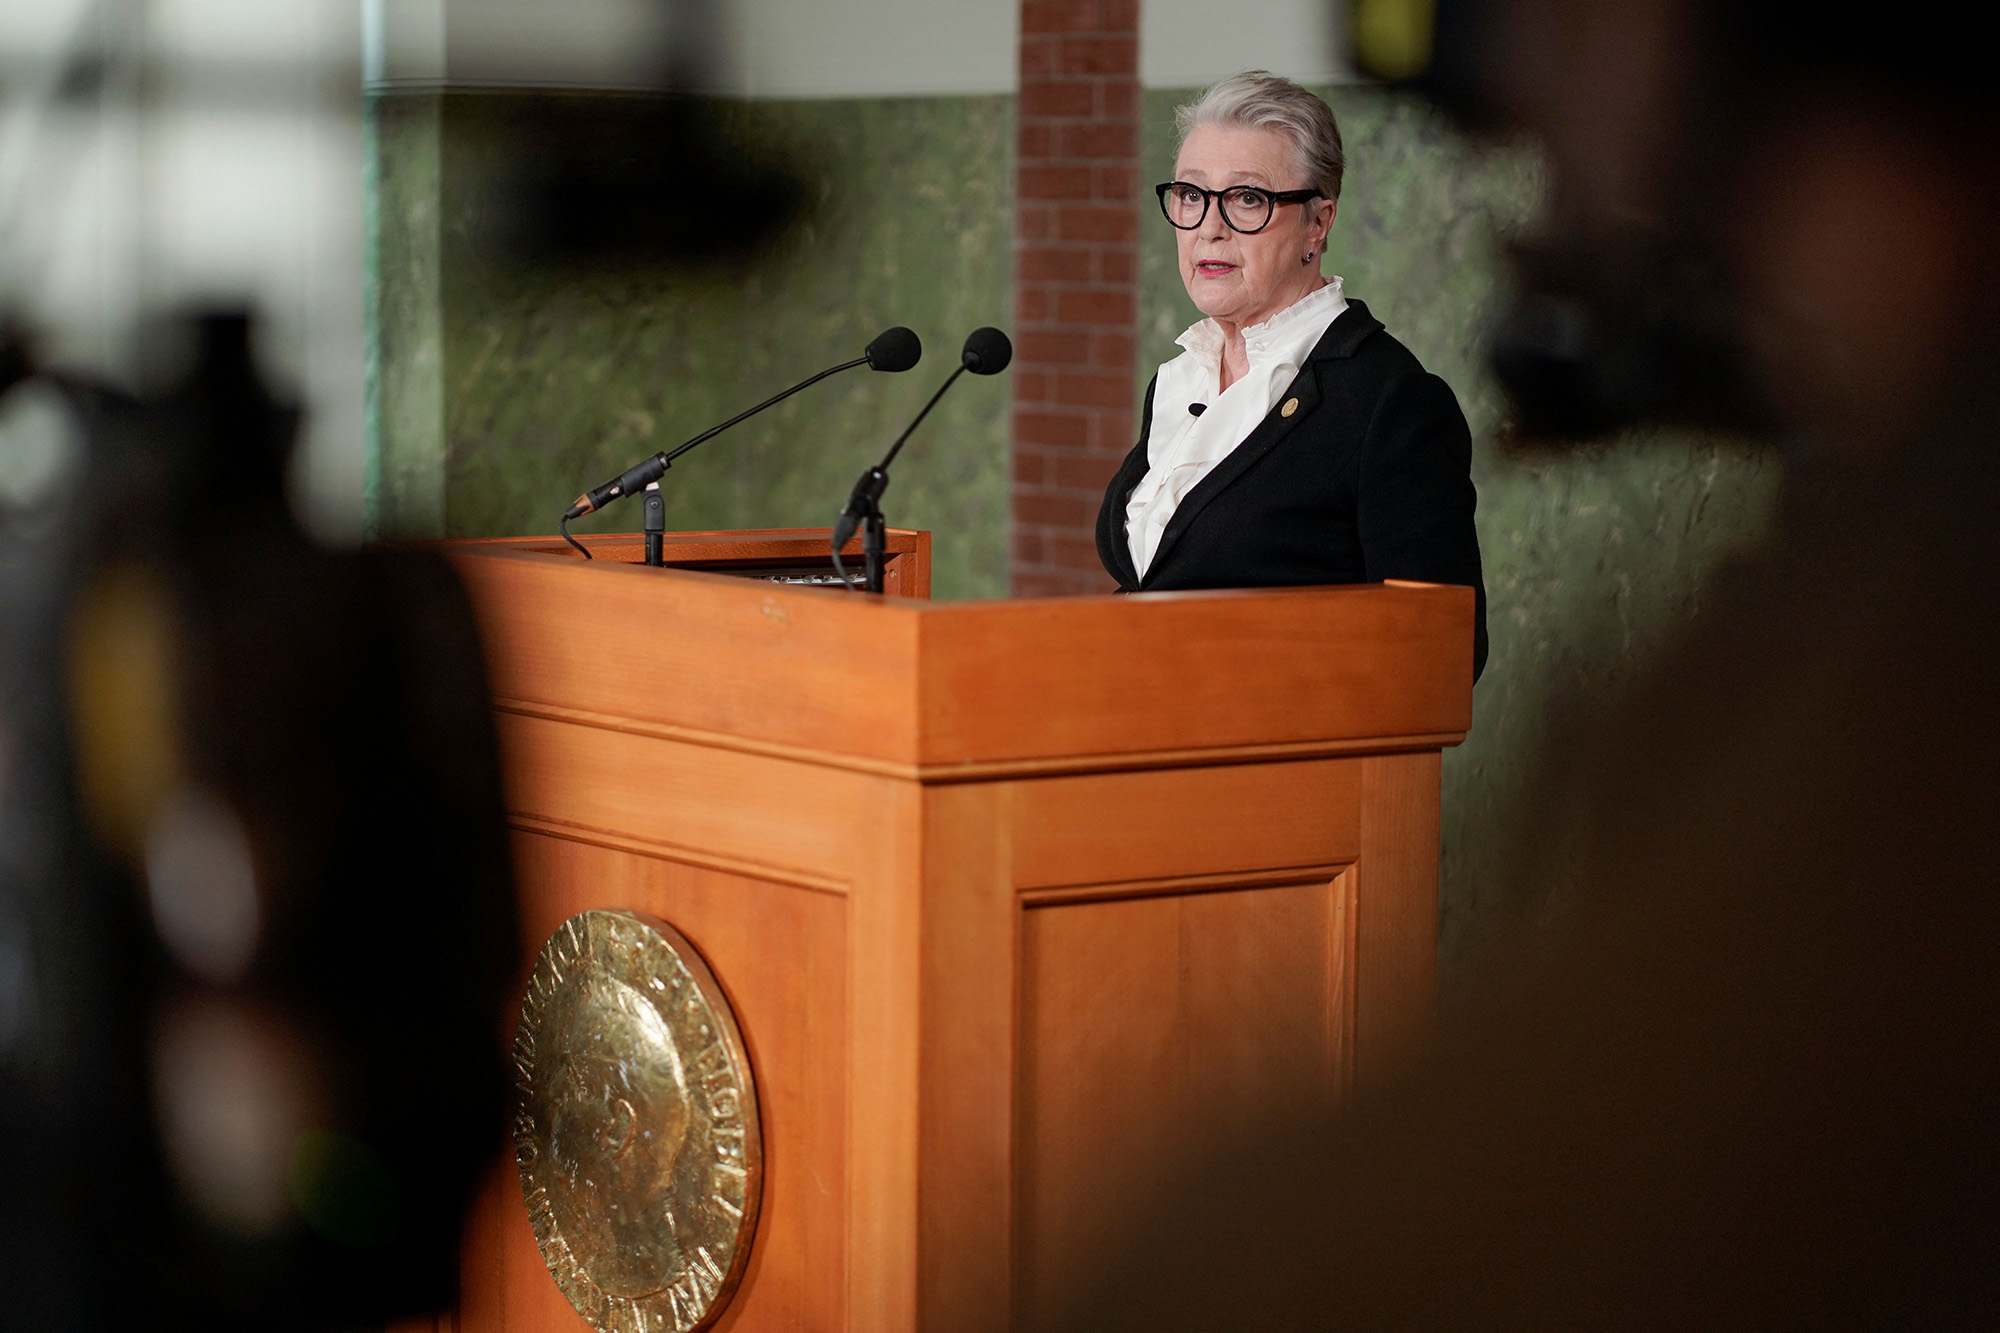 Berit Reiss-Andersen, chair of the Nobel Peace Prize Committee, speaks during a press conference to announce the winner of the 2022 Nobel Peace Prize at the Norwegian Nobel Institute in Oslo, on October 7.